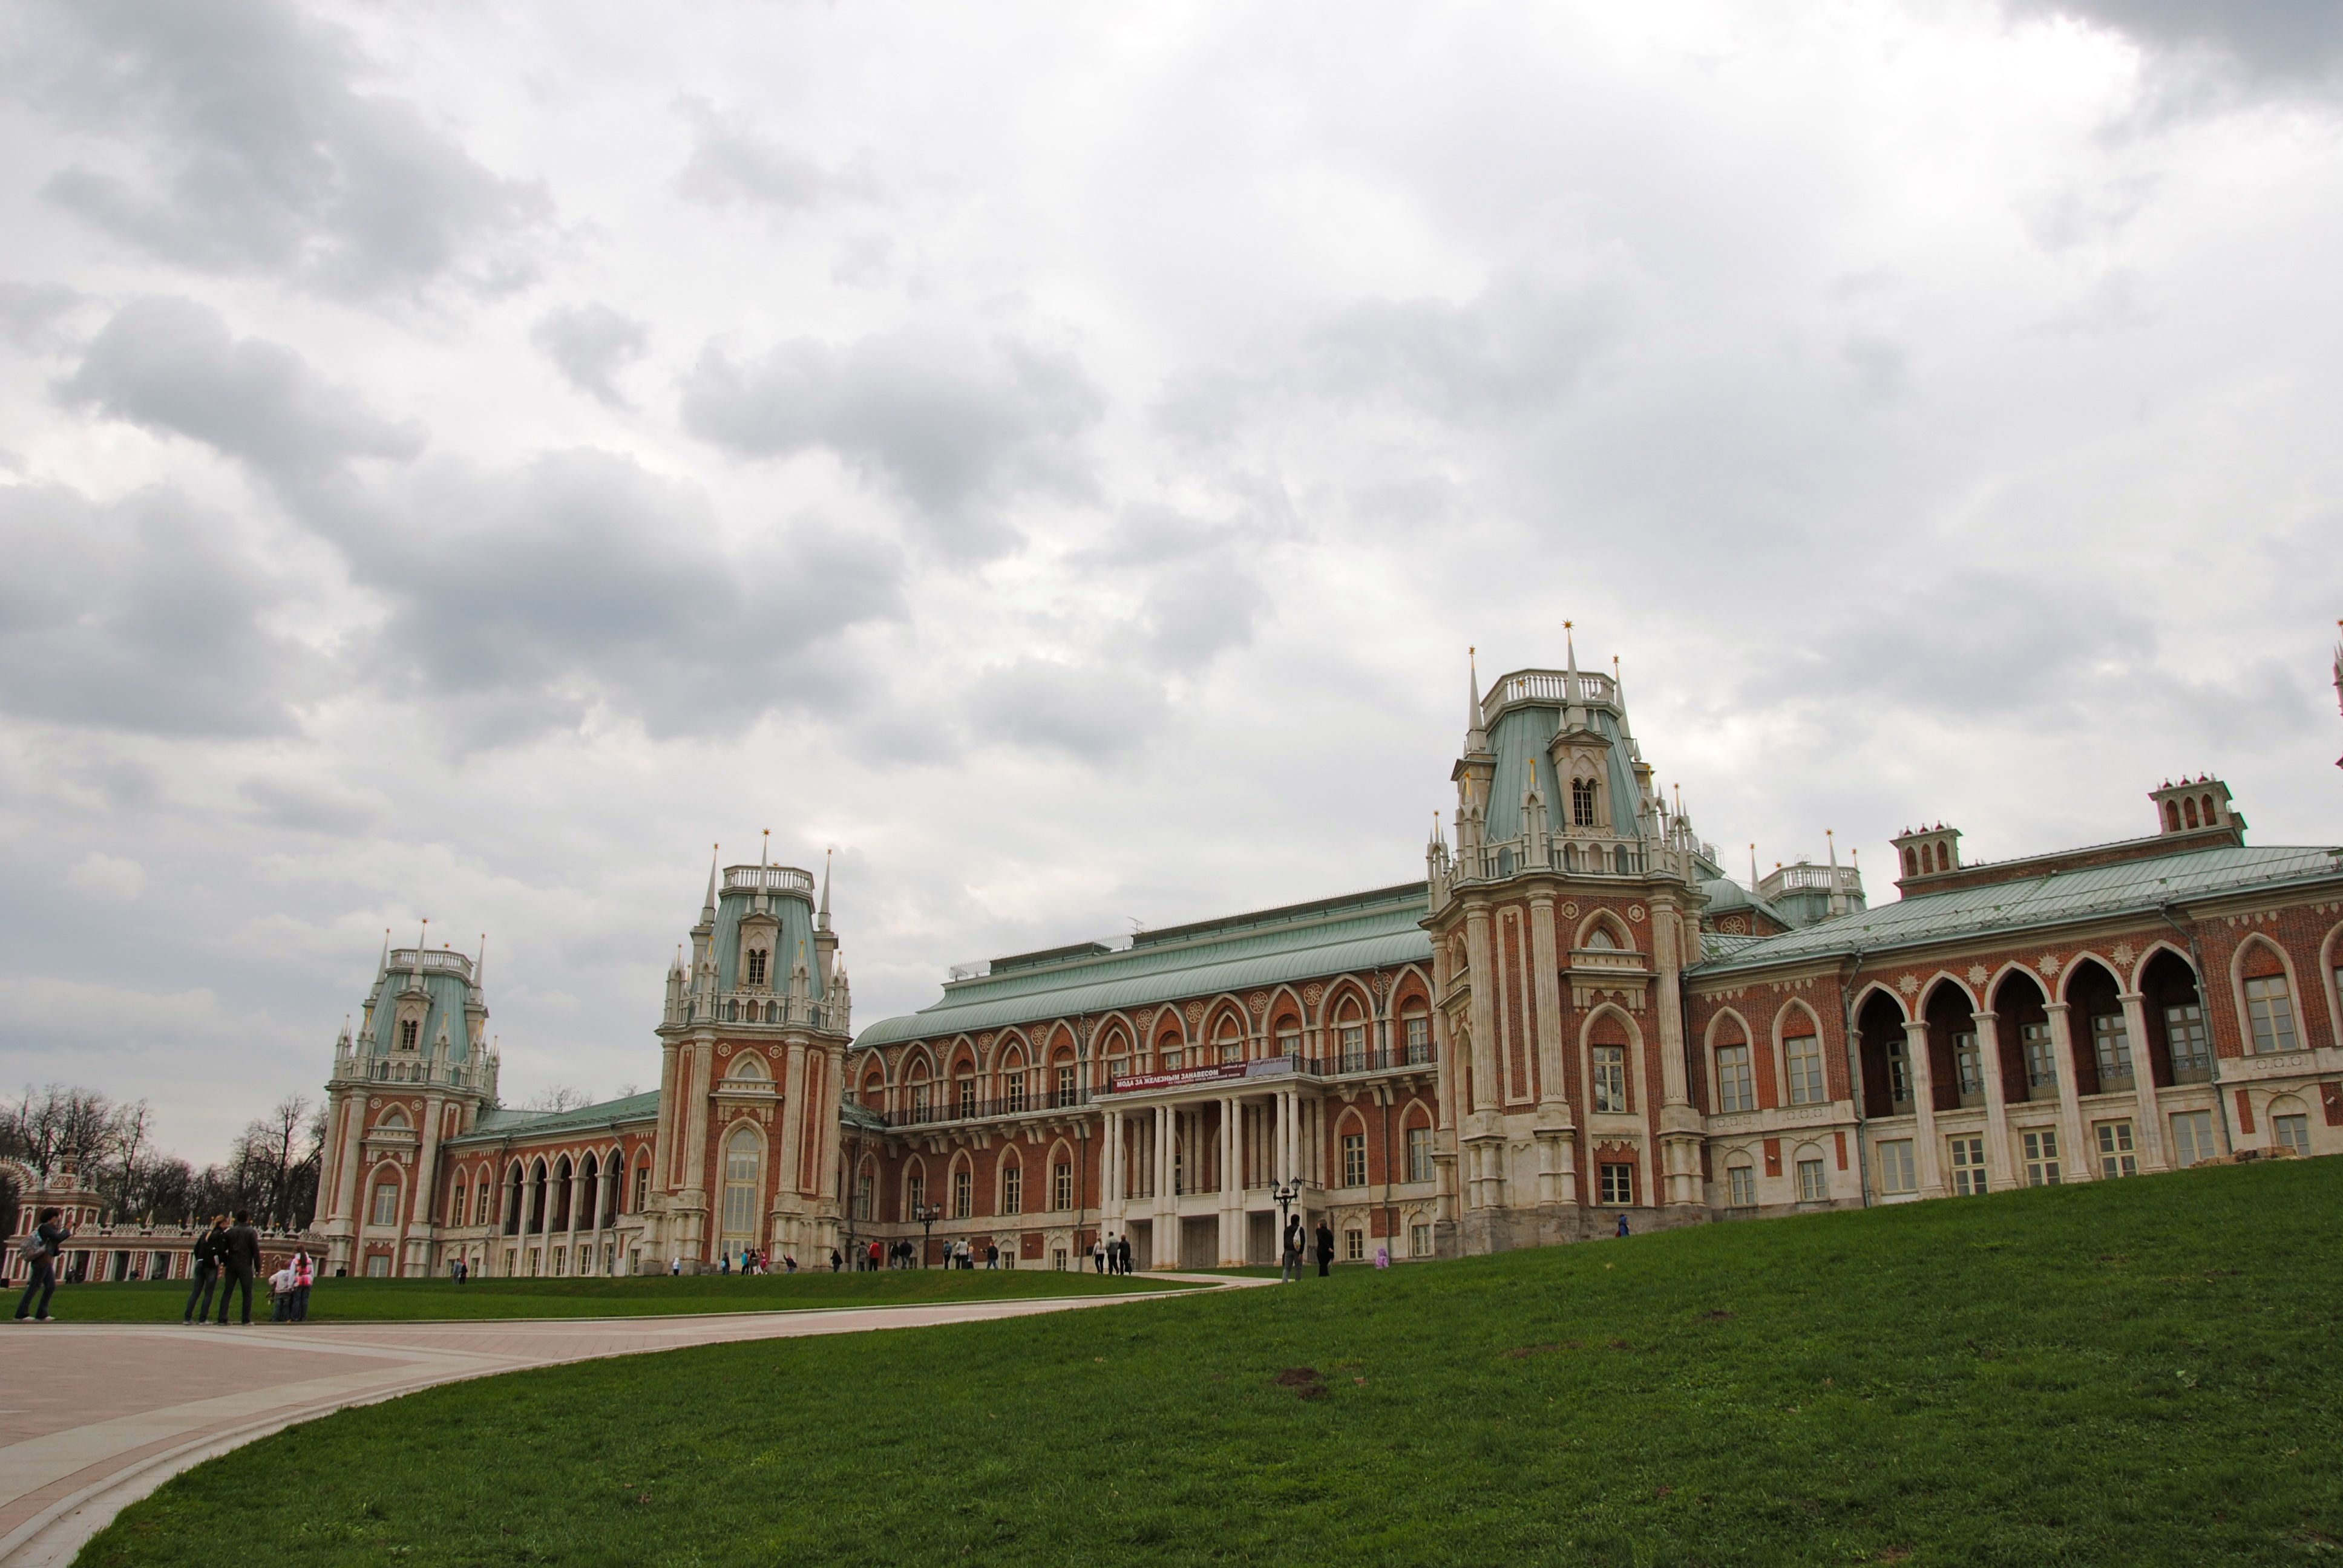 Tsaritsyno – imperial court that never existed